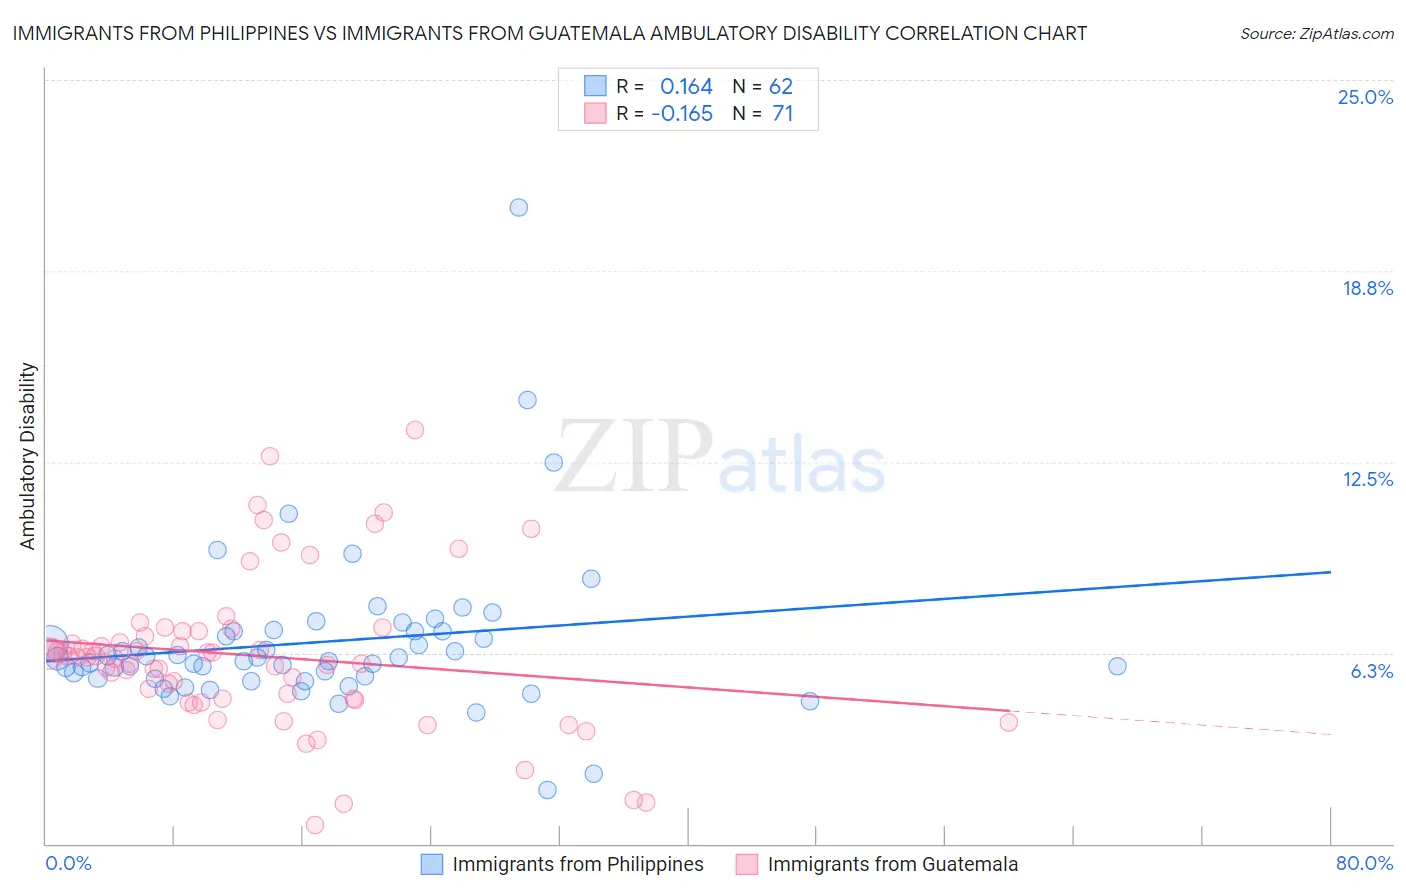 Immigrants from Philippines vs Immigrants from Guatemala Ambulatory Disability